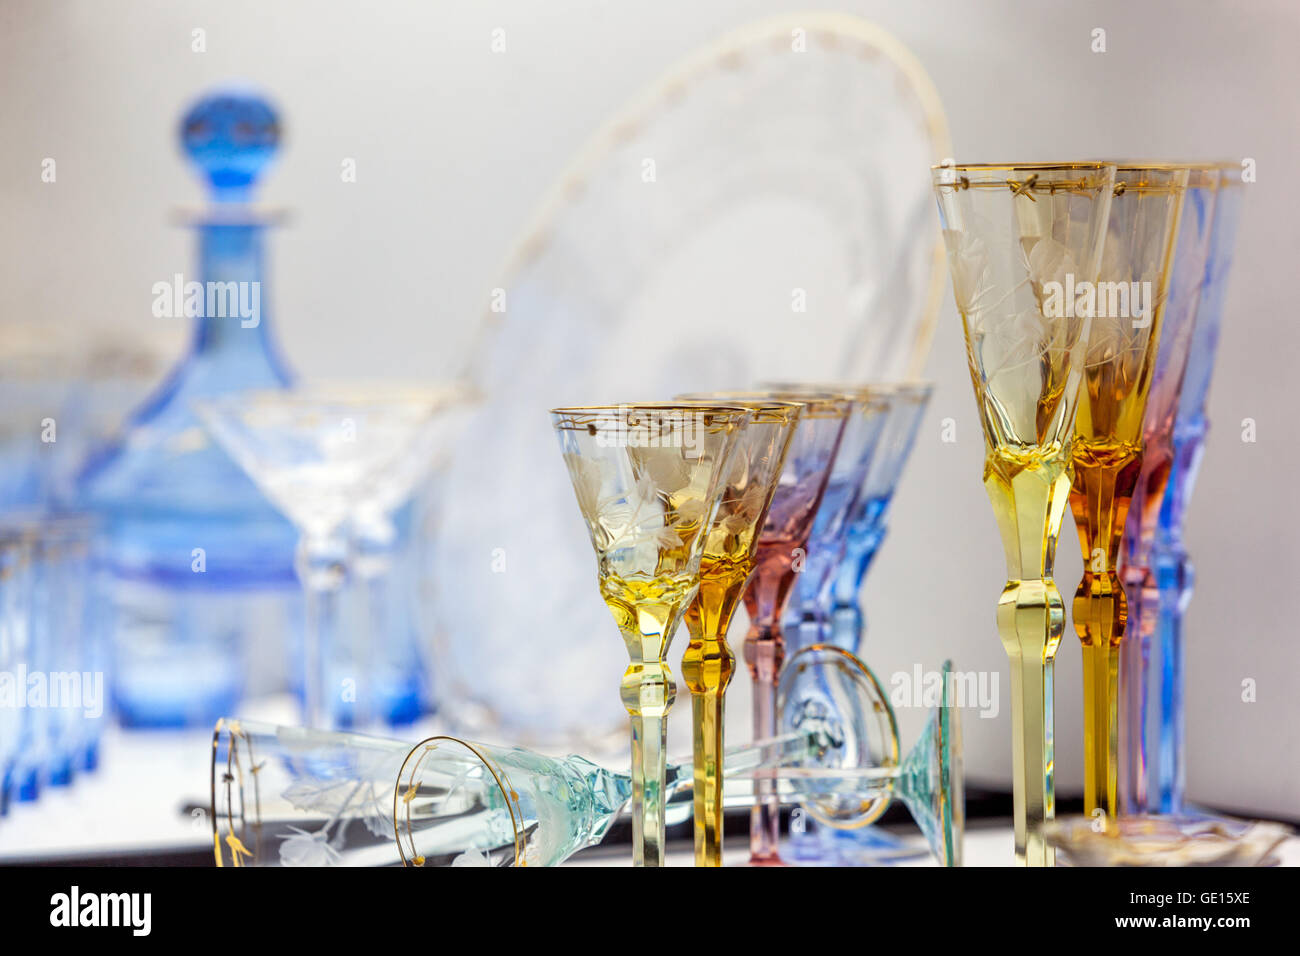 Current products Moser glassworks, company store display, Karlovy Vary, Bohemia crystal glass shop Czech Republic Glassware Stock Photo